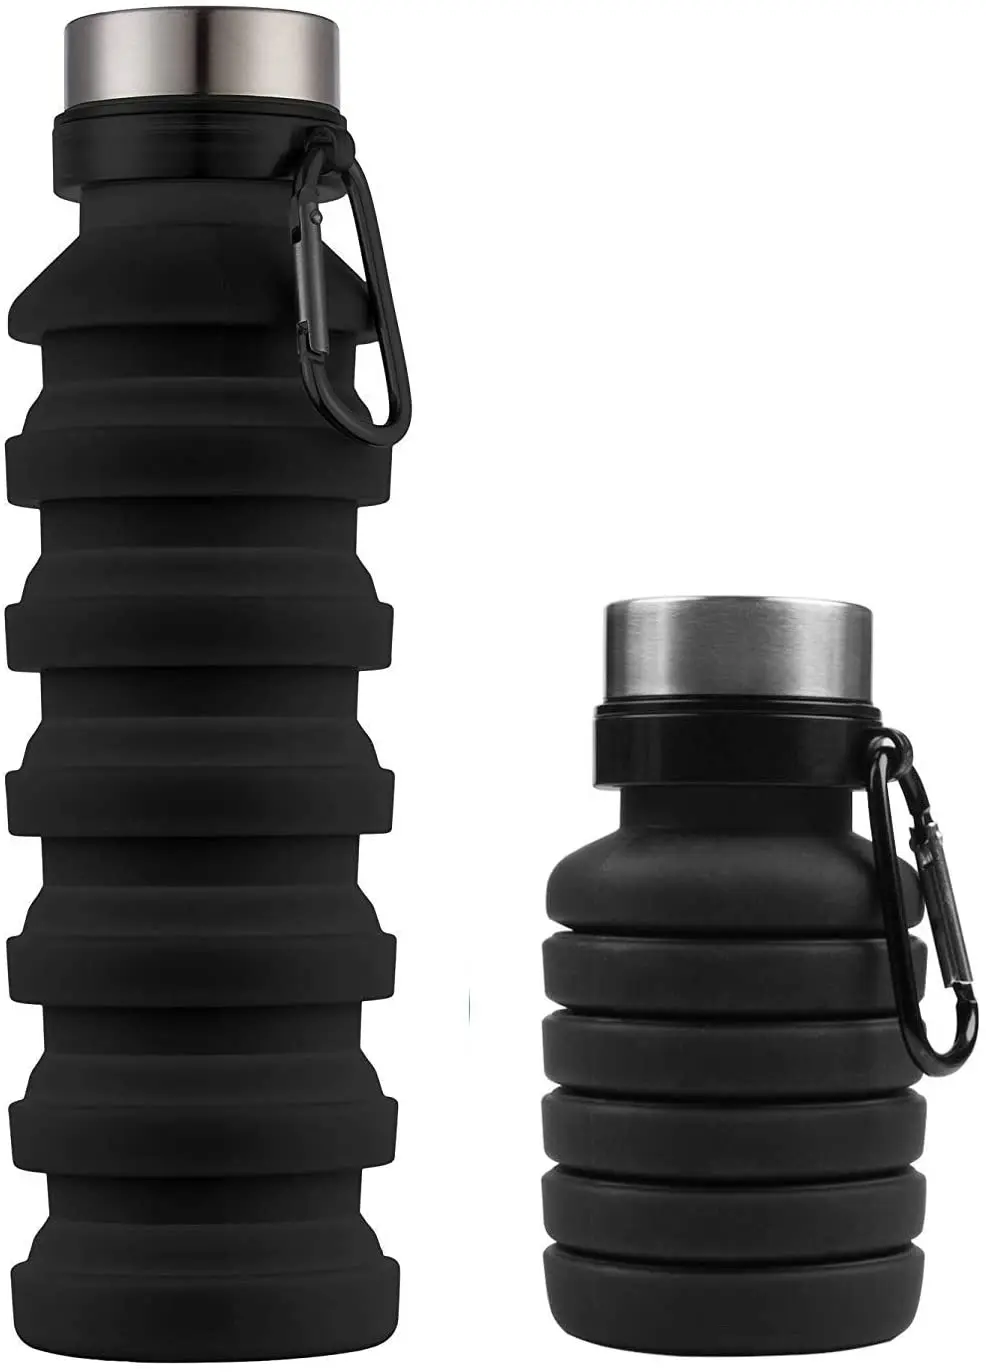 https://ae01.alicdn.com/kf/He962c070f51040a282ffaee43e397caa6/Silicone-Squeezed-Adjustable-Collapsible-Water-Bottles-Folding-Sports-Leak-Proof-Bottle-Travel-Hiking-Camping-Drink-Bottles.jpg